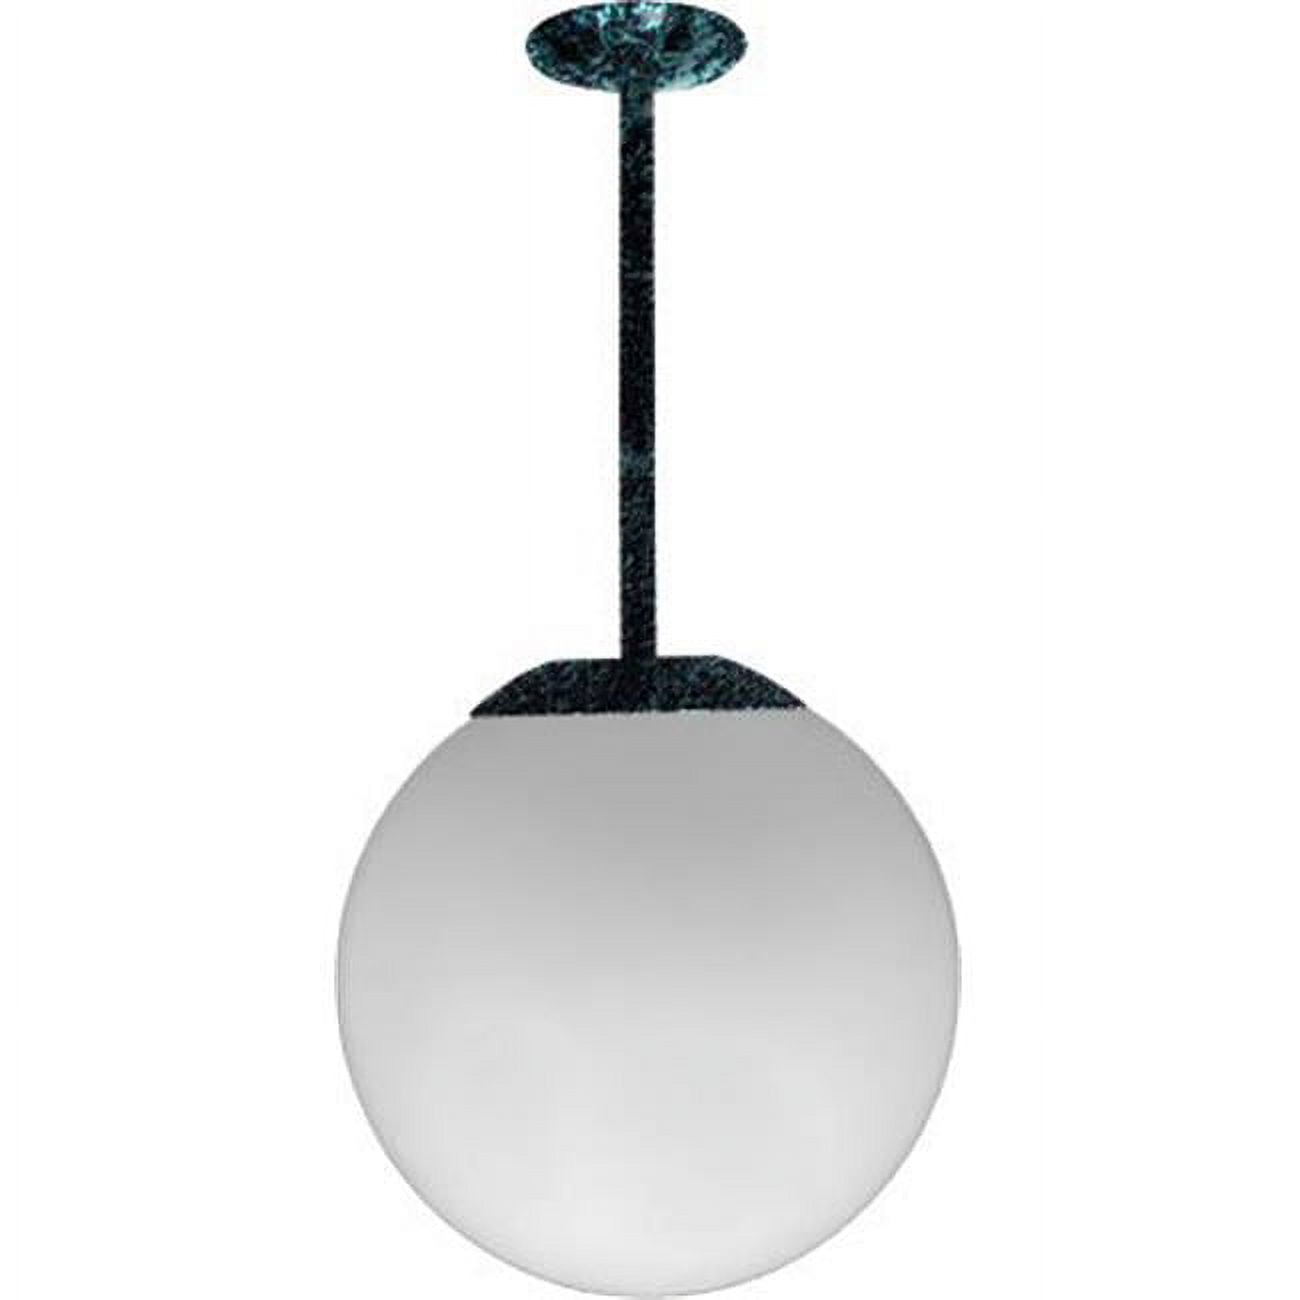 D7513-12-vg 16 In. 120 V 50 Watts Ceiling Globe Fixture 12 In. Drop With High Pressure Sodium Lamp, Verde Green